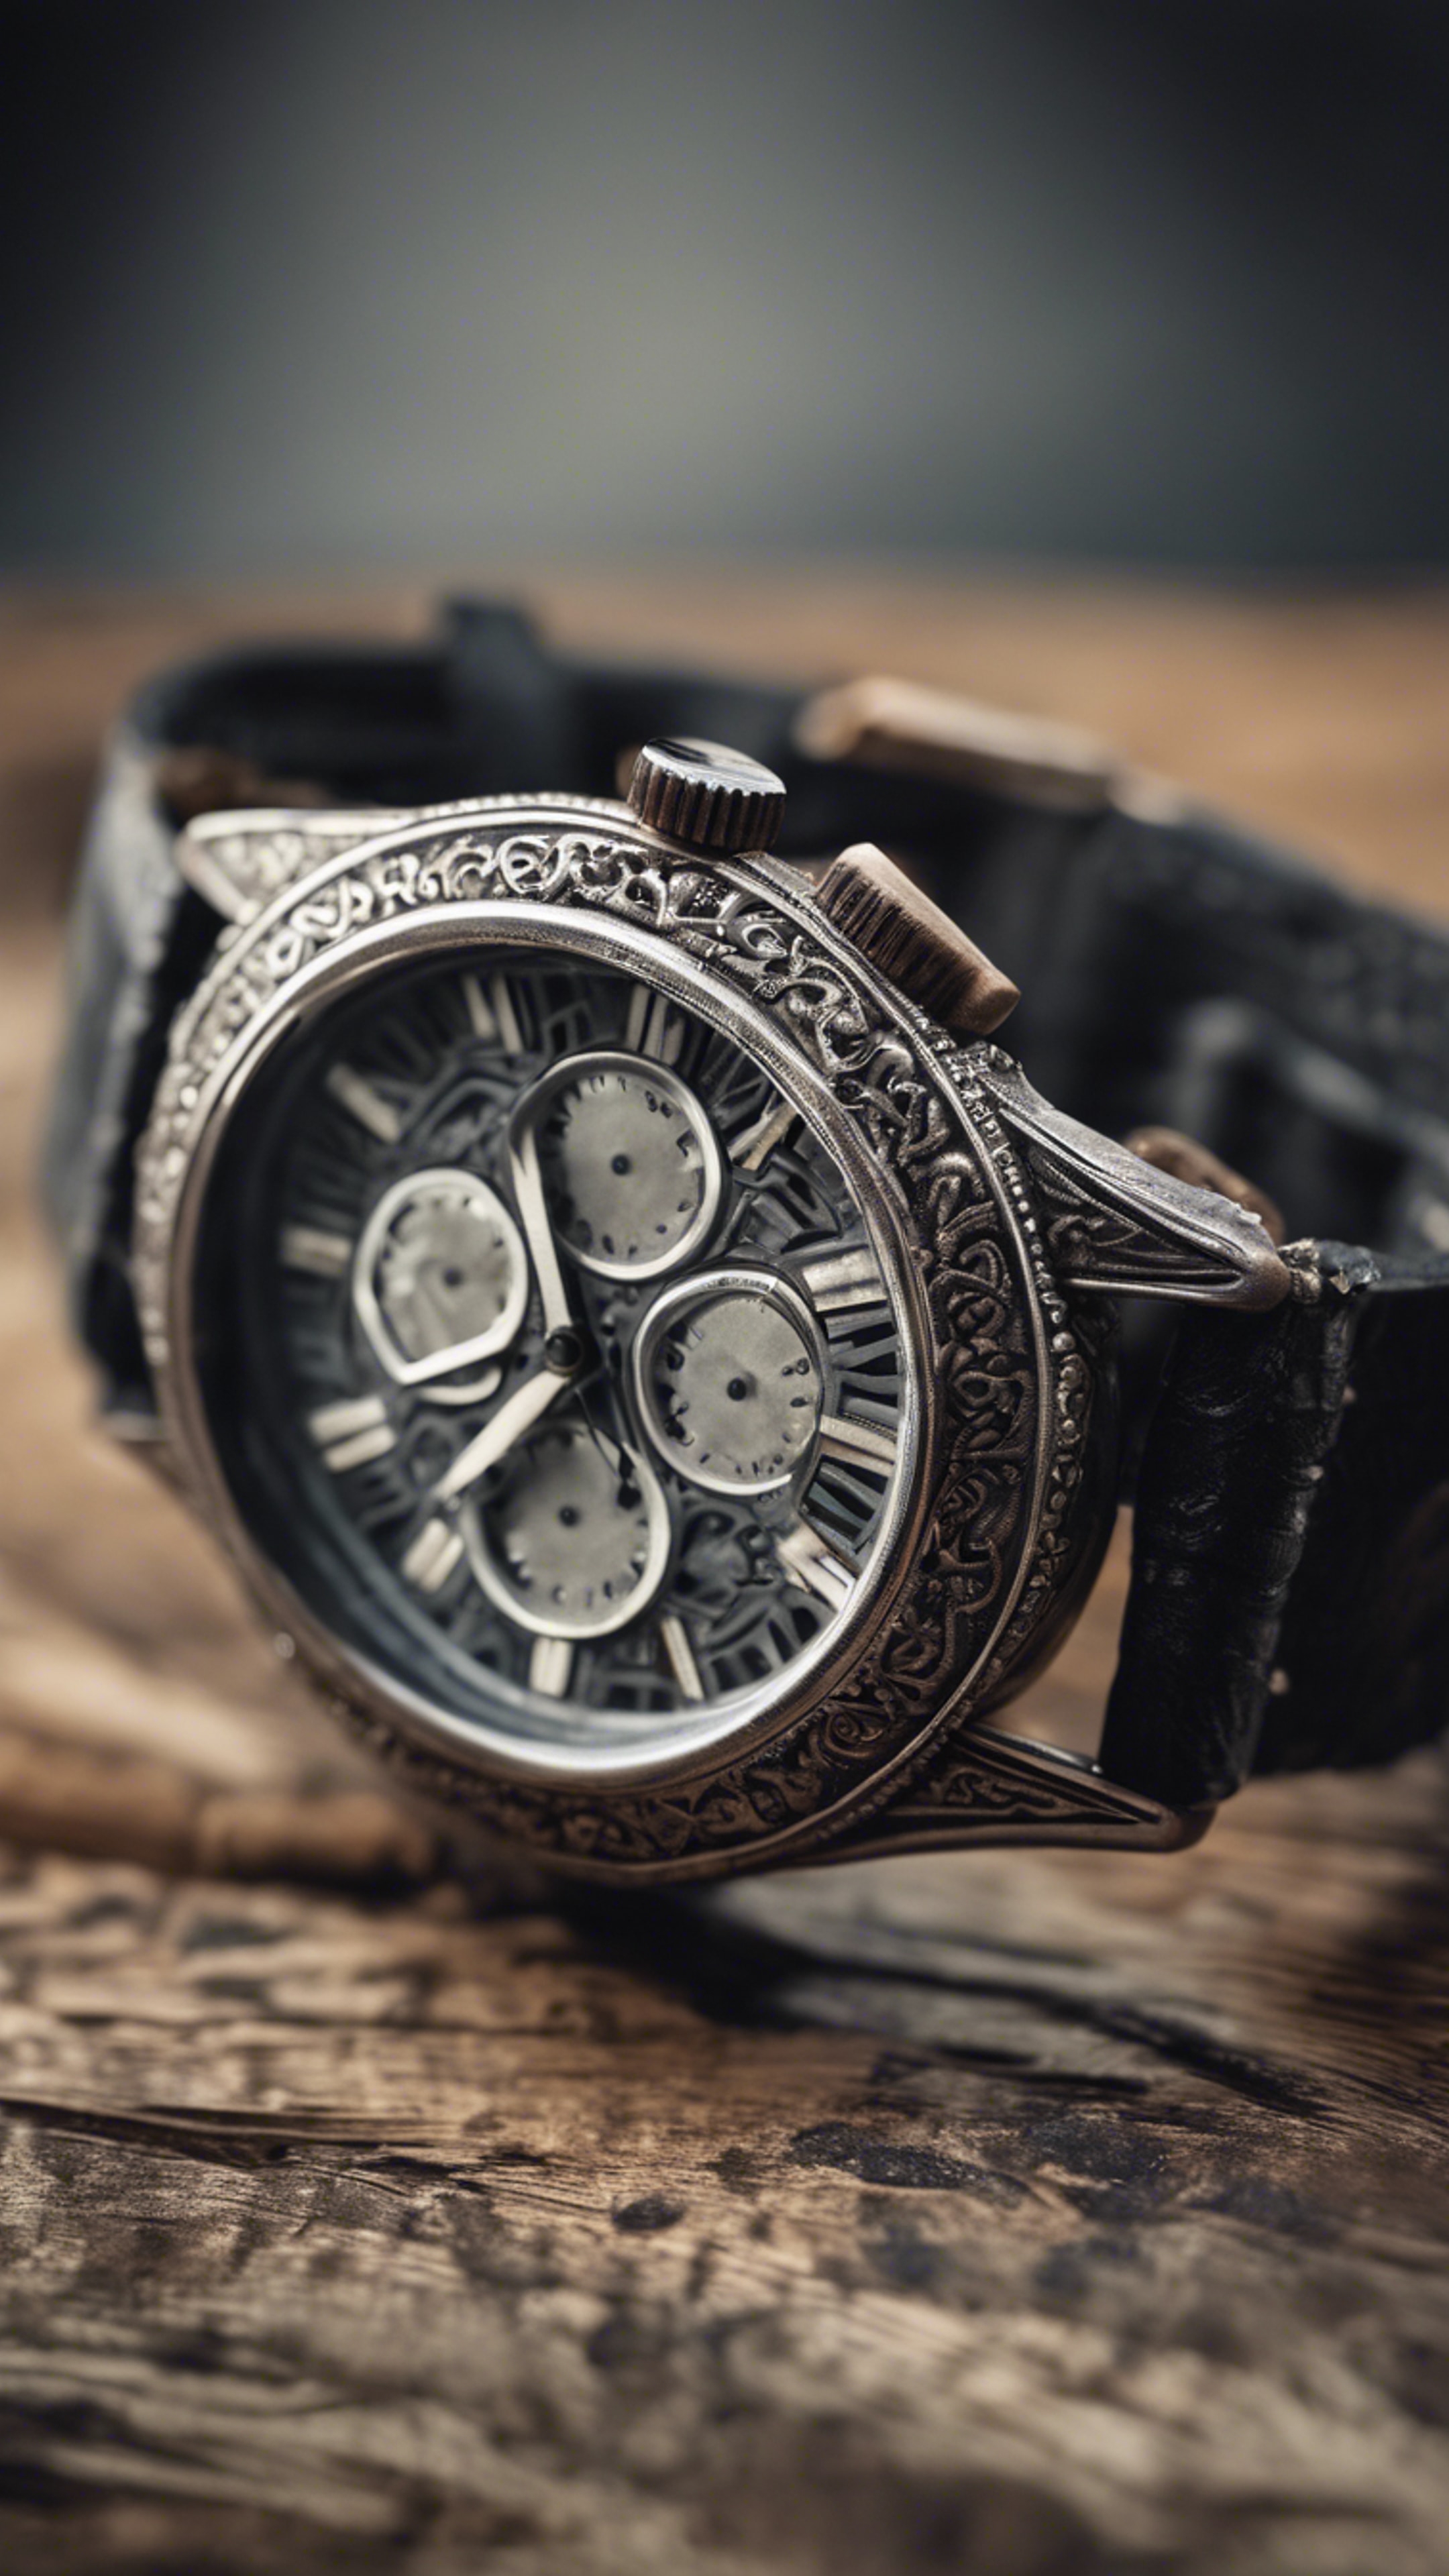 An antique, rustic, black and gray wristwatch with intricate details in its design. Kertas dinding[fa36b50287764cf98f6d]